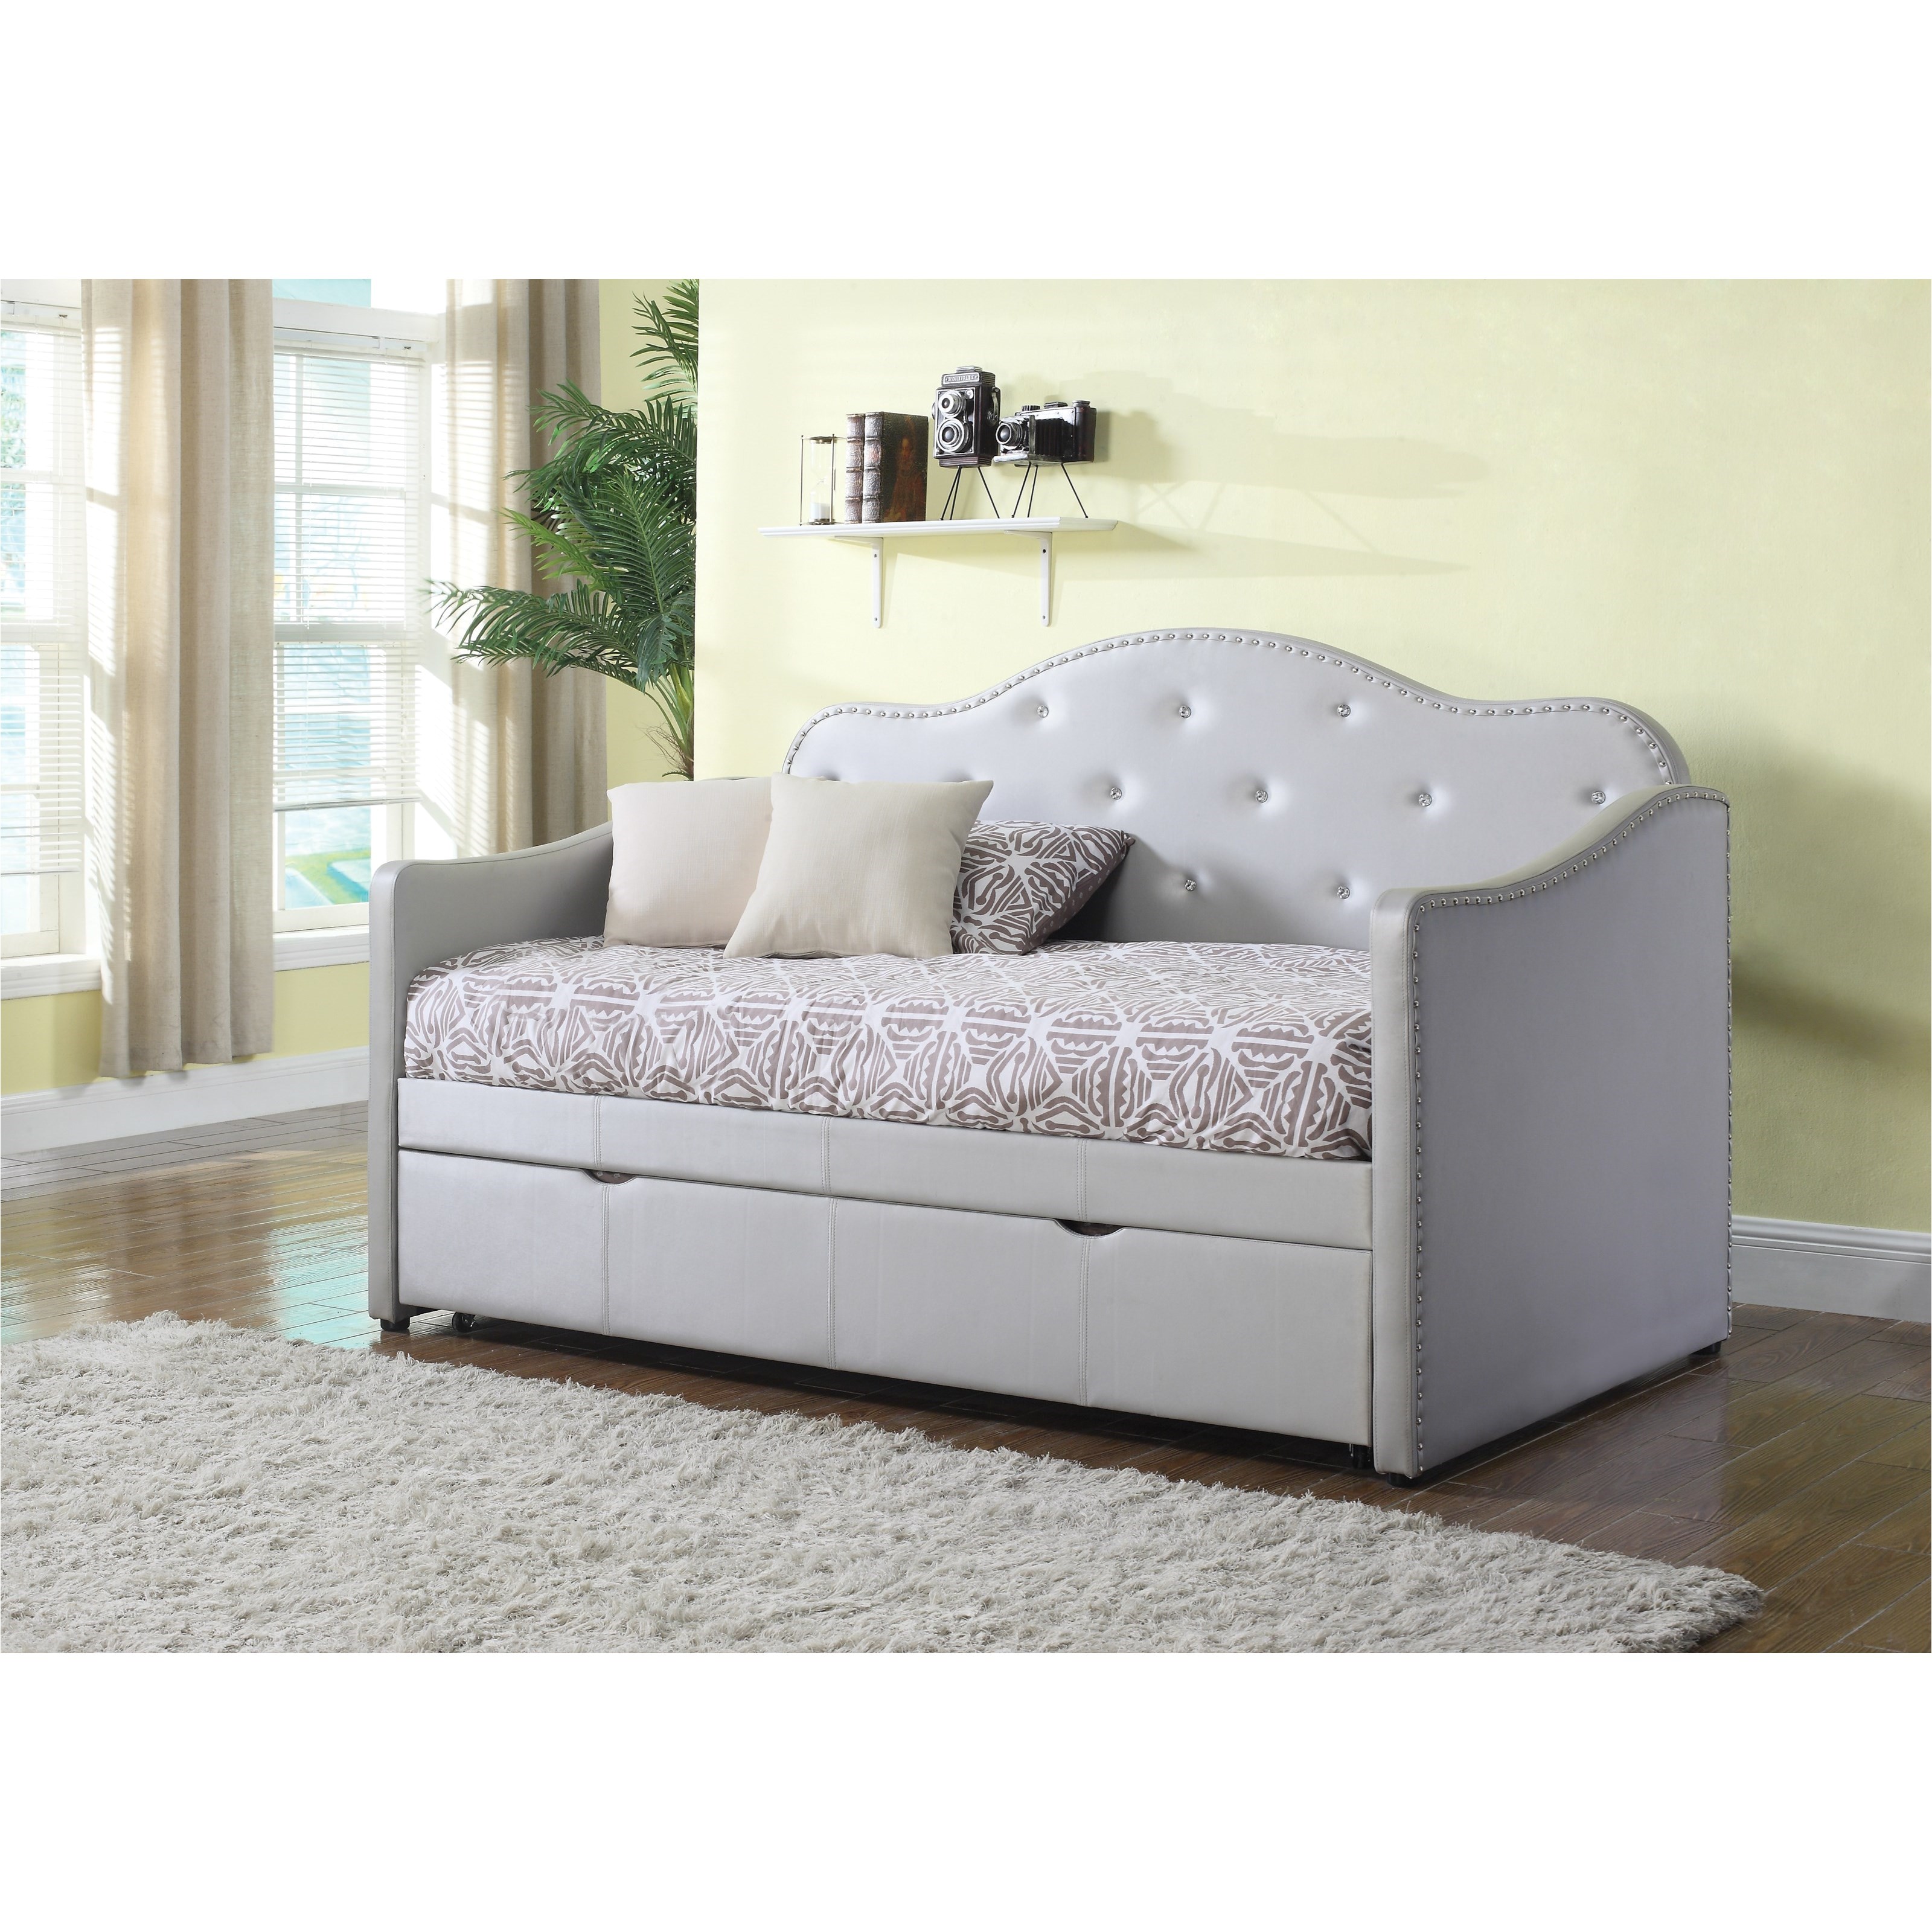 Value City Furniture Daybeds Coaster Daybeds by Coaster Upholstered Daybed with Trundle